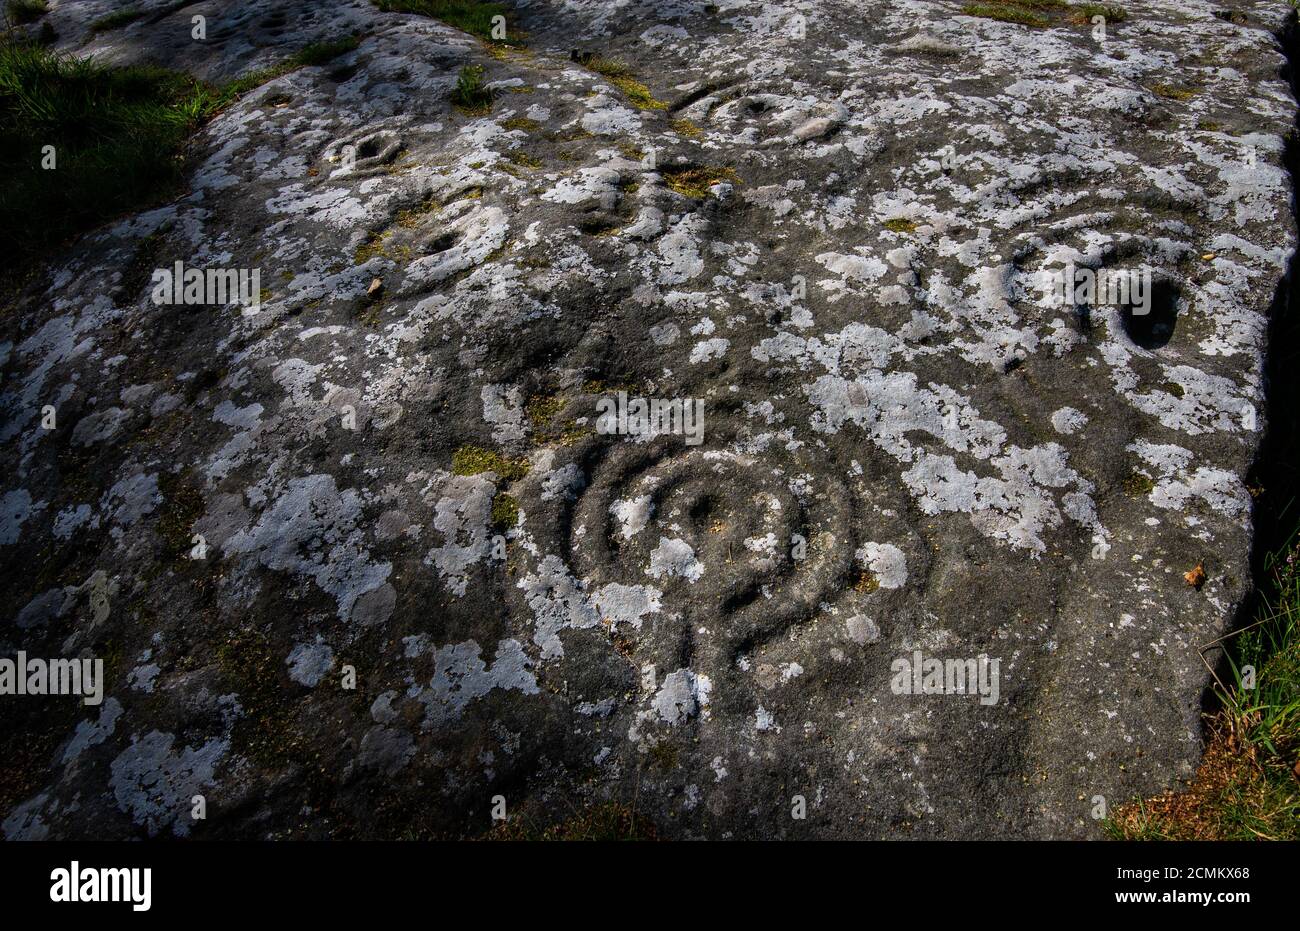 Cup and ring markings near Roughing Linn, near Ford in rural North Northumberland close to the Scottish border Stock Photo